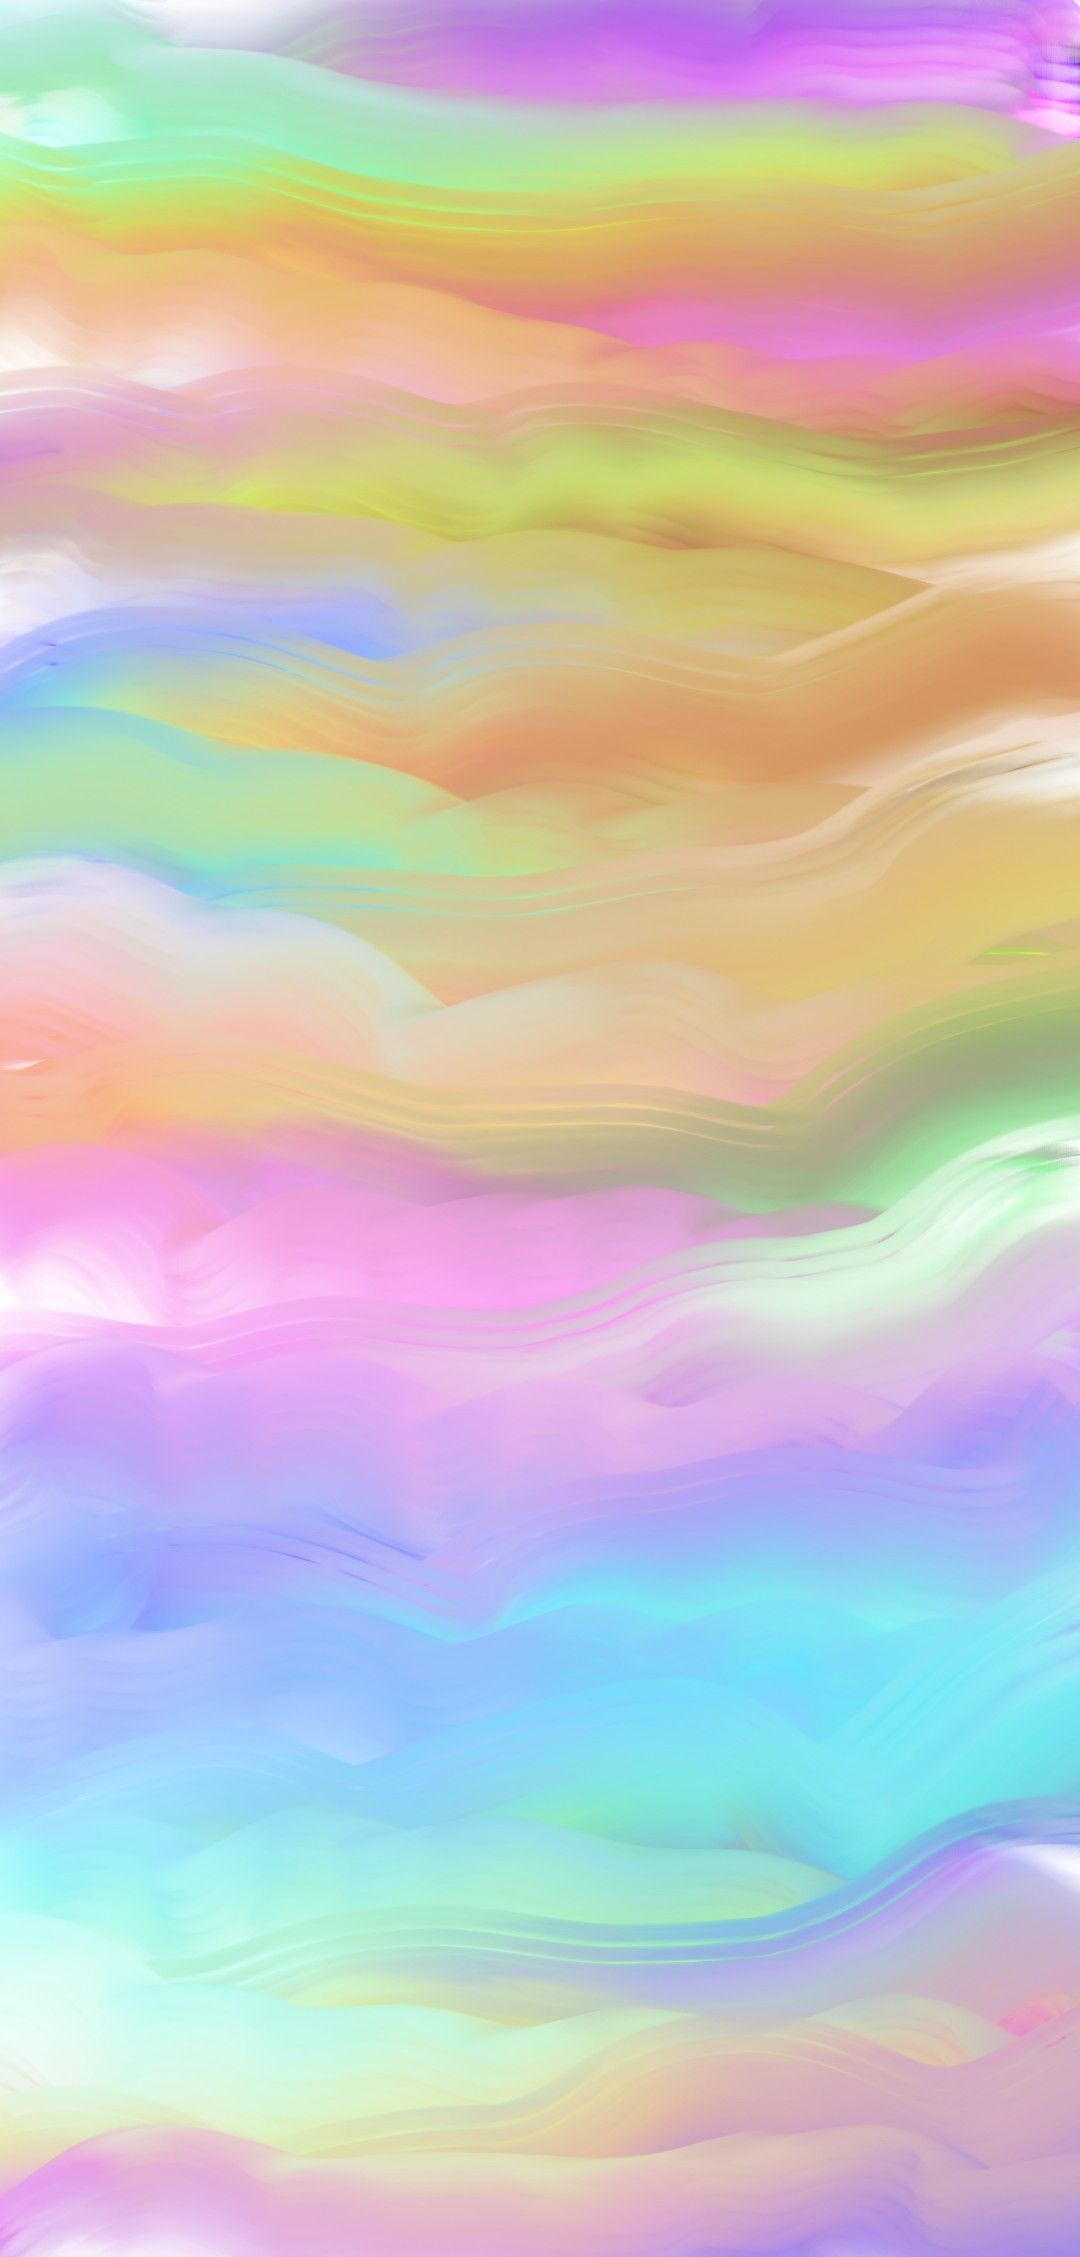 Cloudy waves. Art sketches, Aesthetic wallpaper, Digital drawing